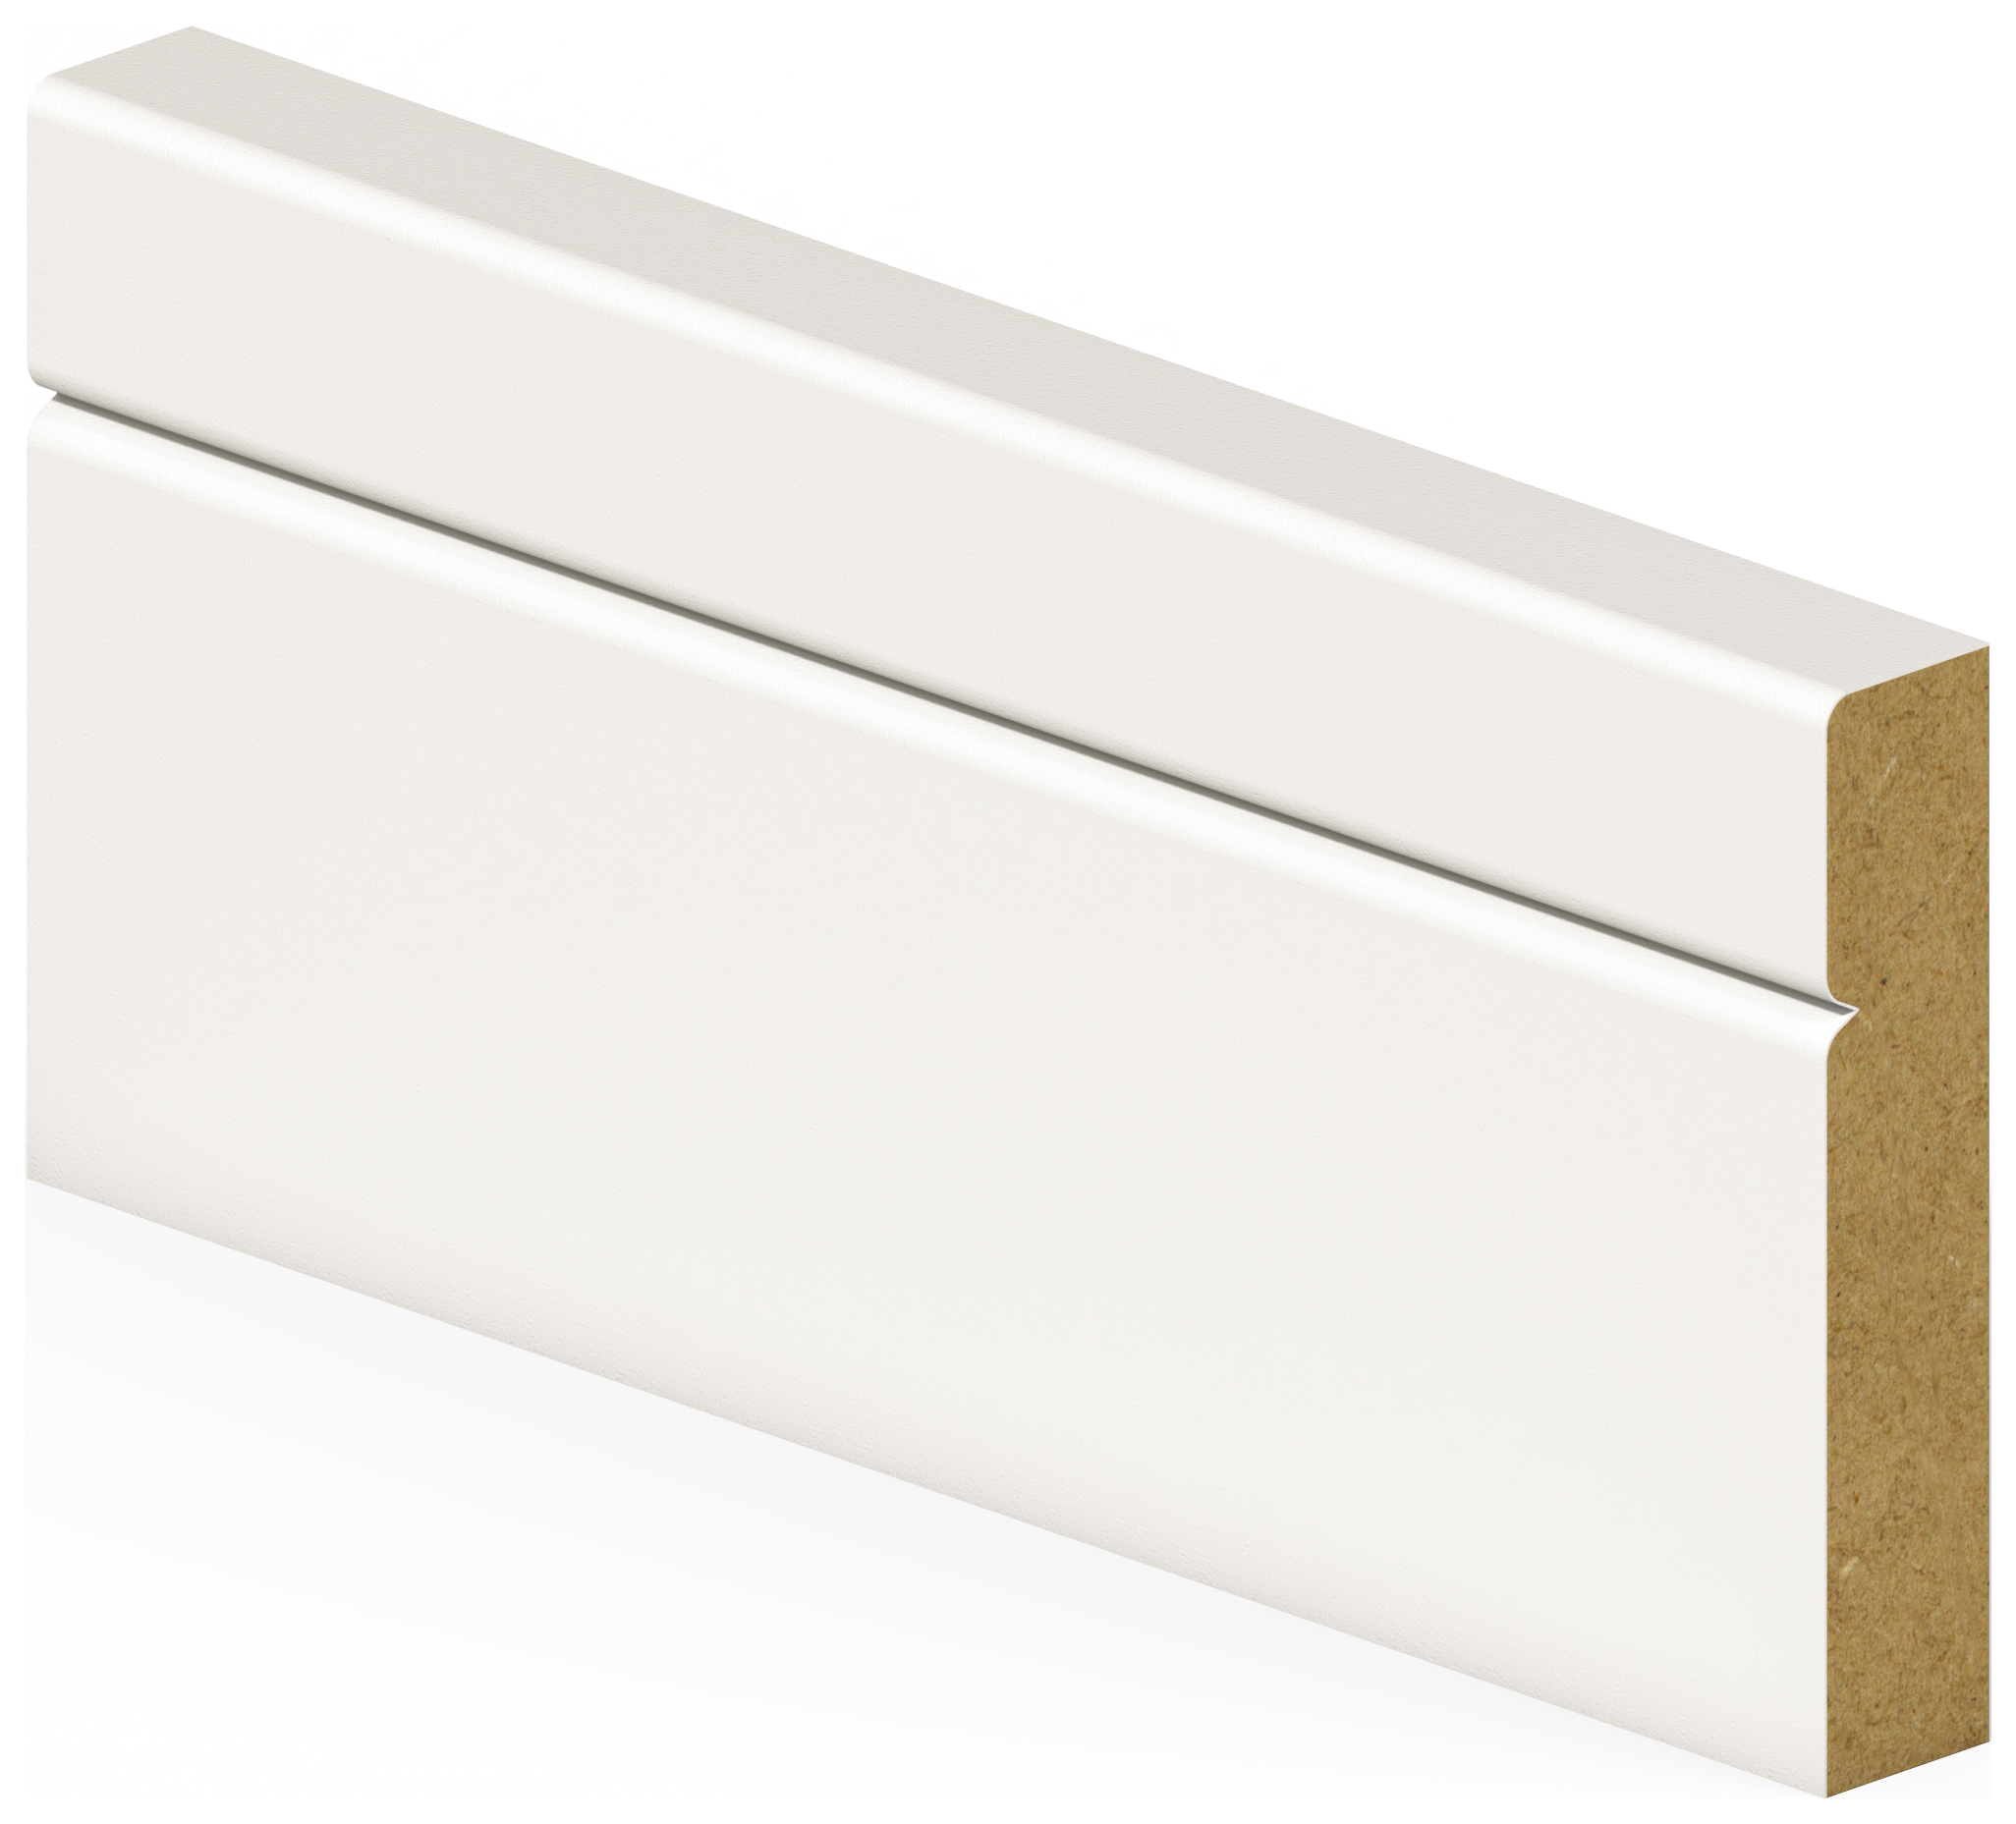 Wickes V-Groove White MDF Architrave / Skirting - 14.5 x 69 x 2400mm